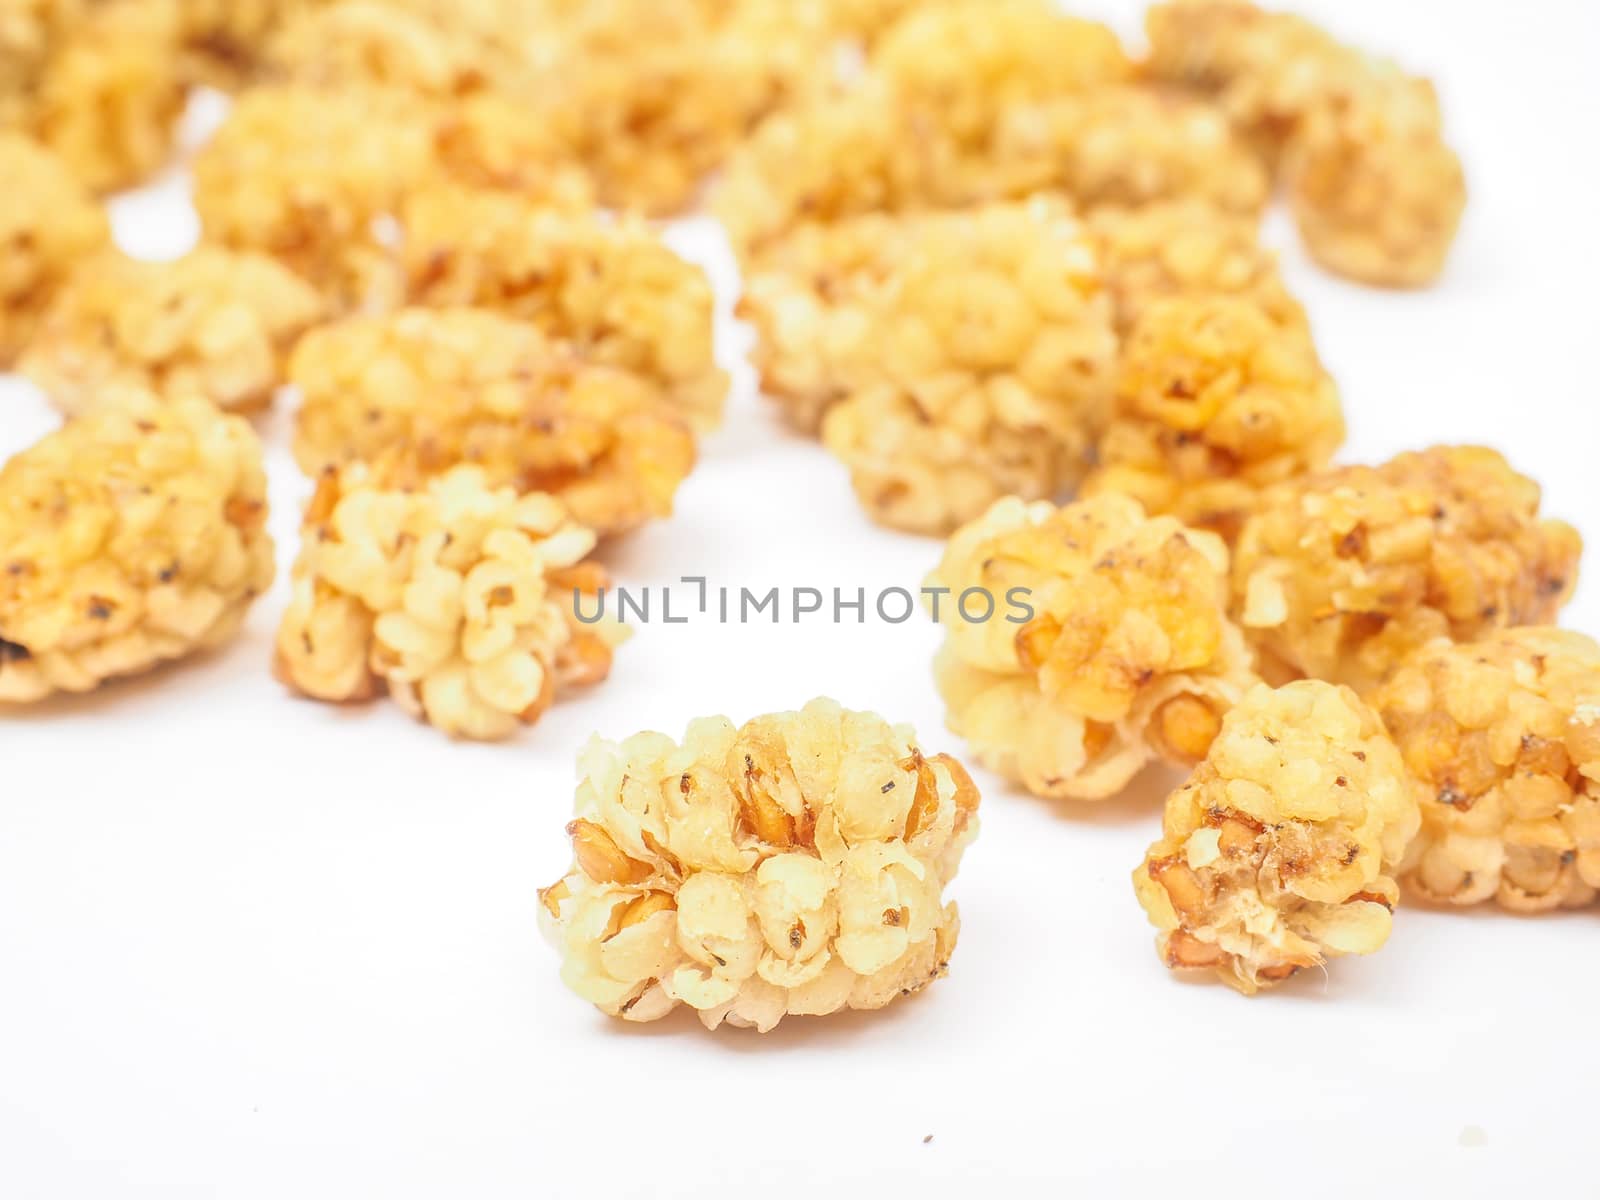 Closeup of dried mulberry fruits isolated towards white background